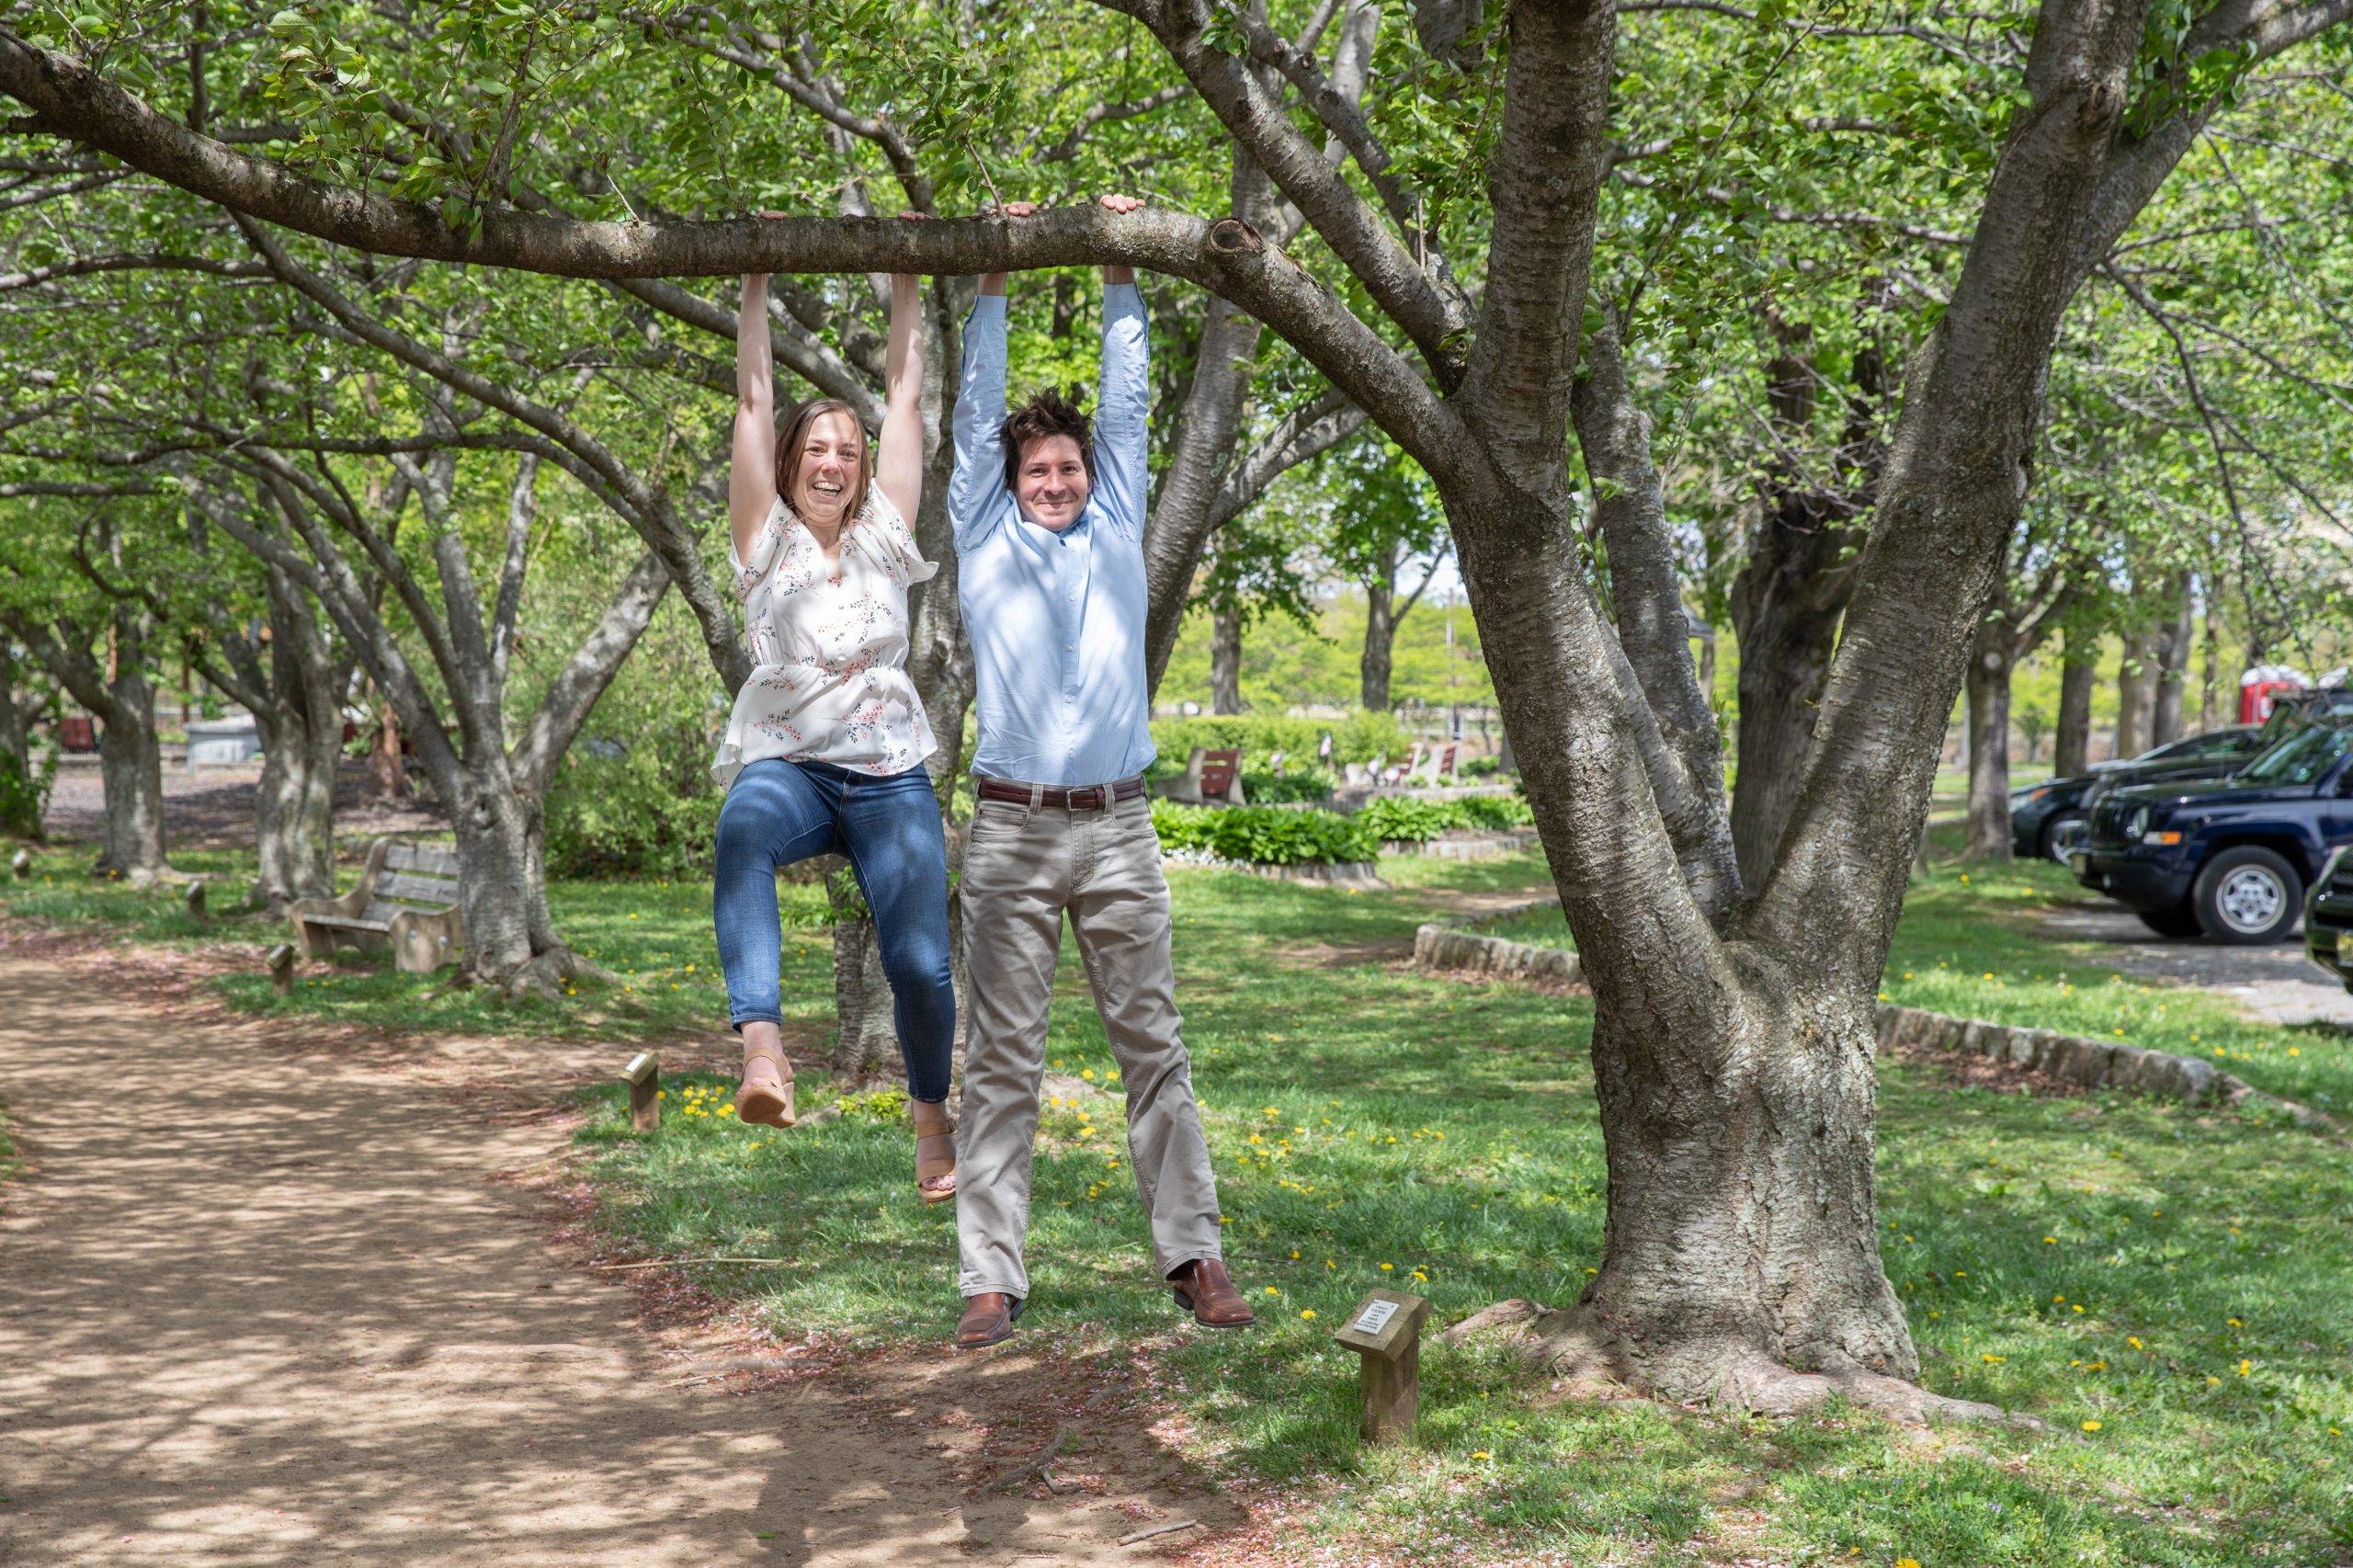 A man and woman hanging from a tree.